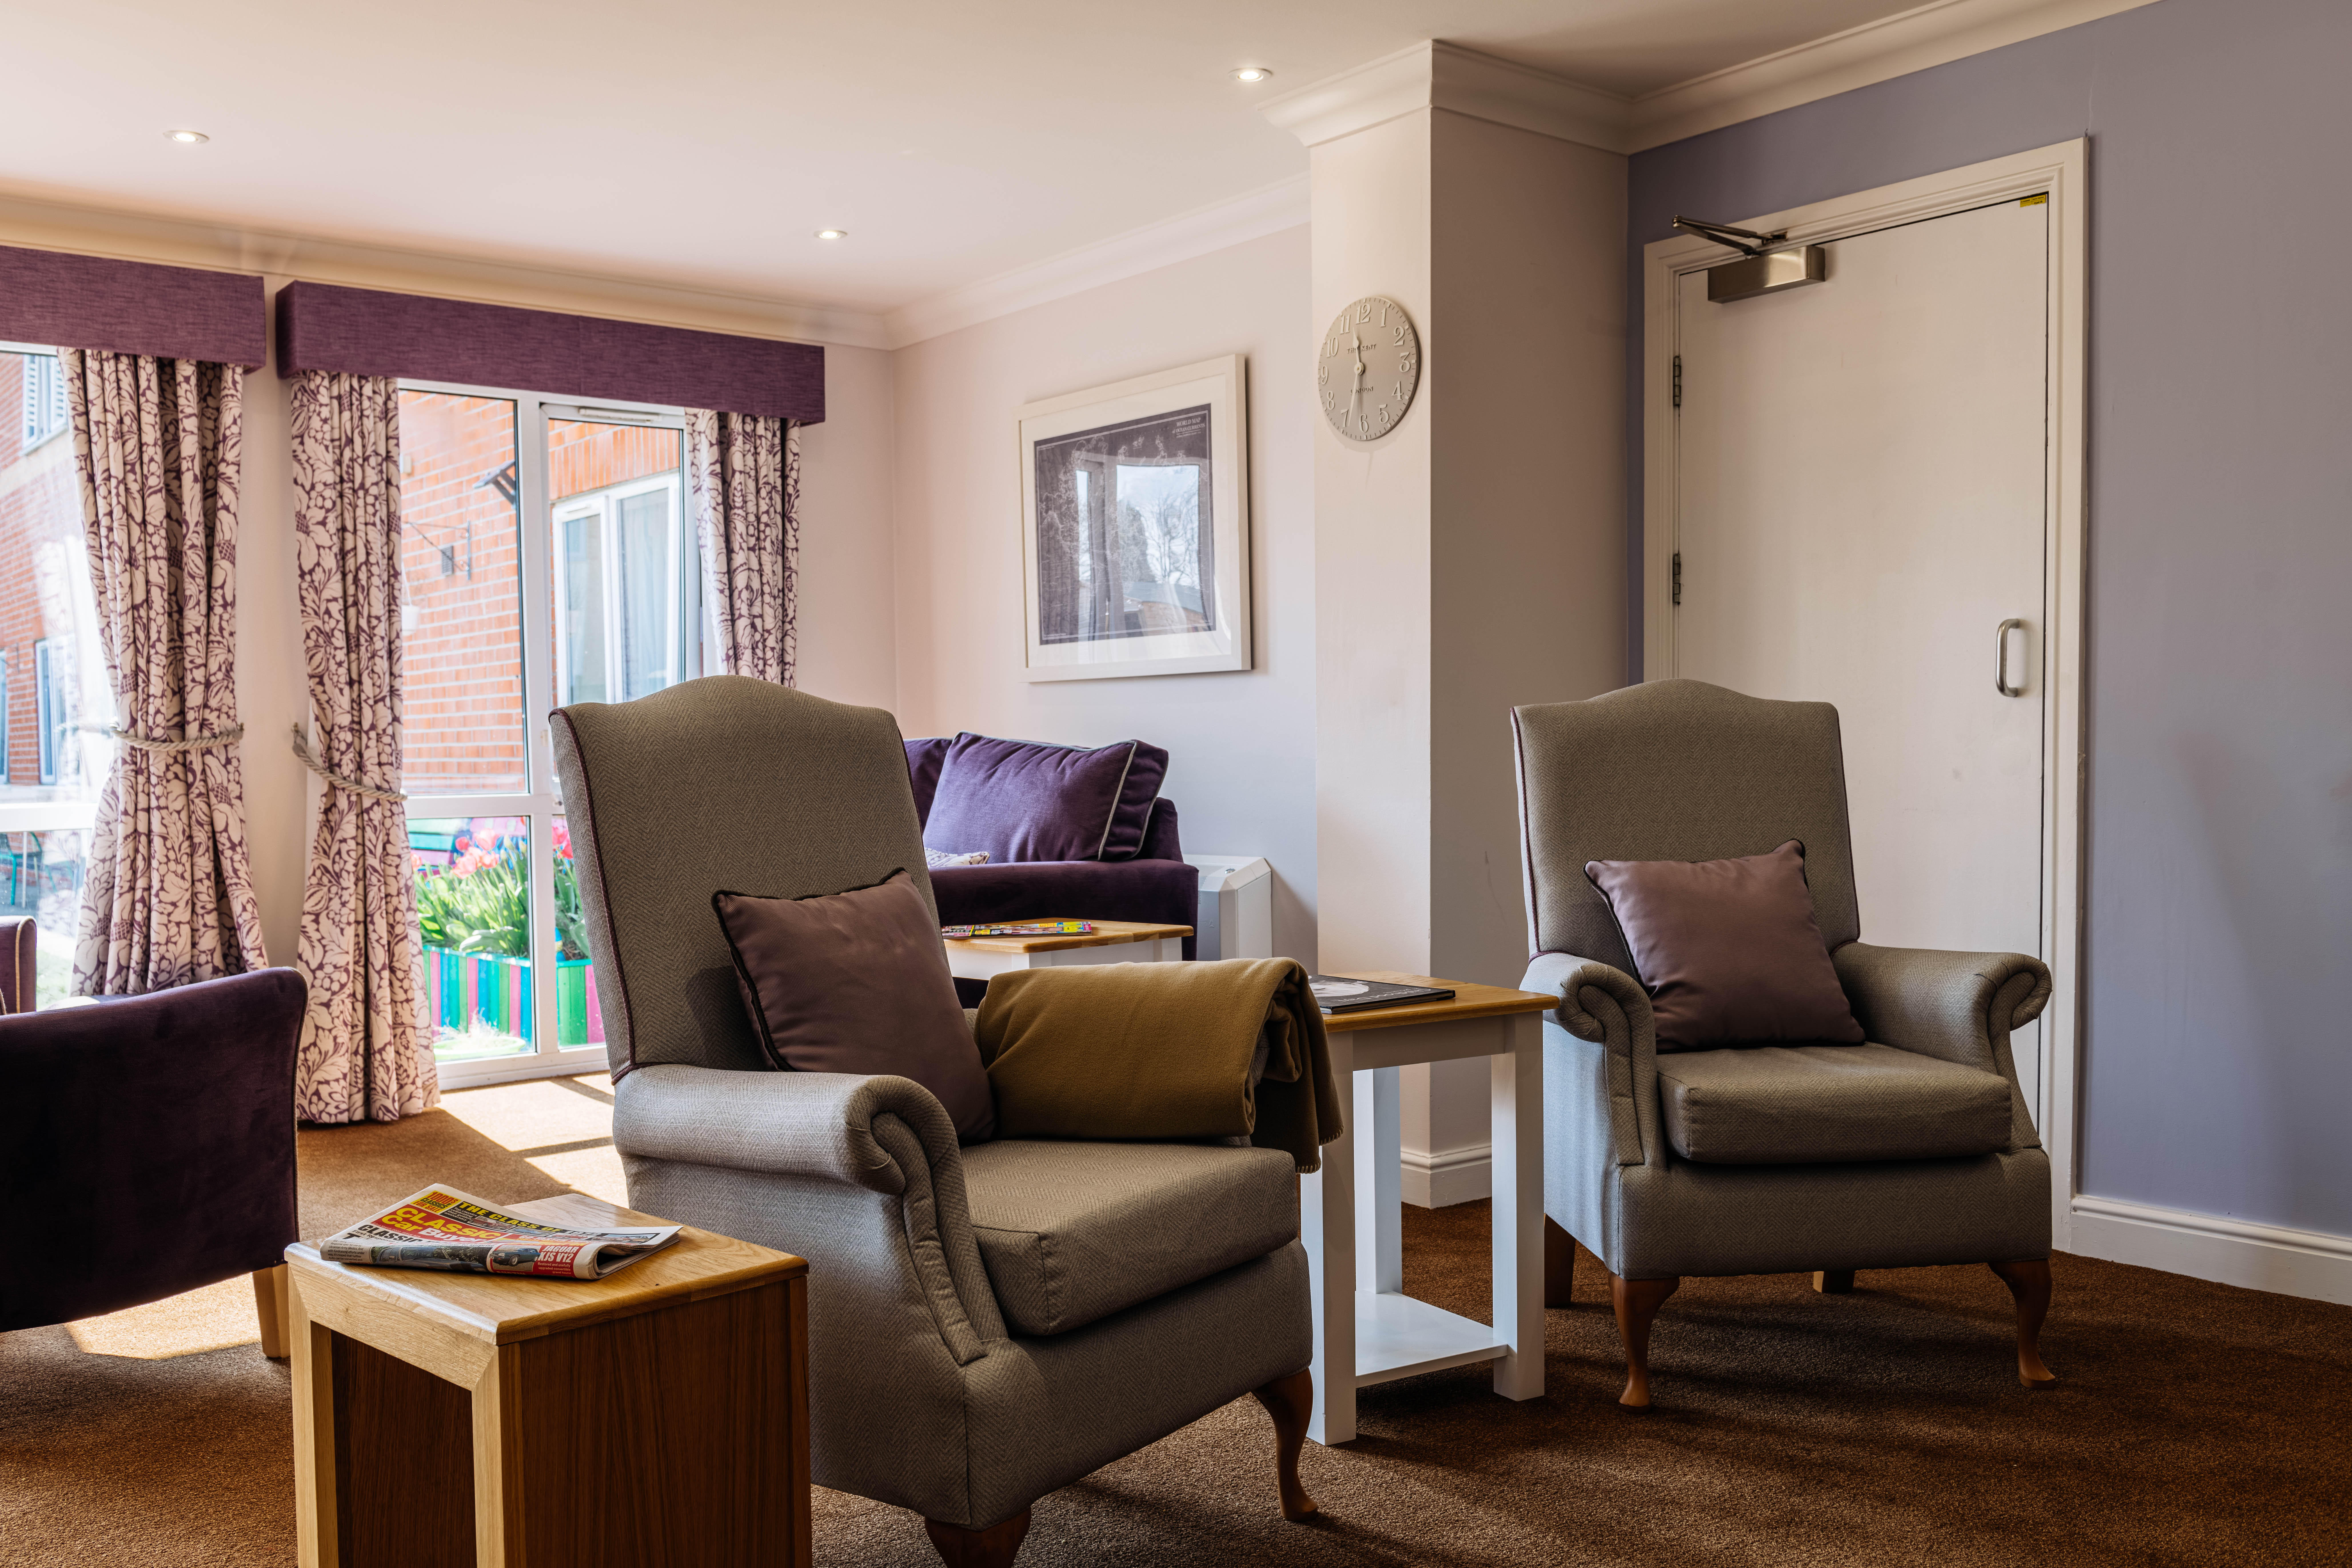 Images Barchester - Lawton Rise Care Home